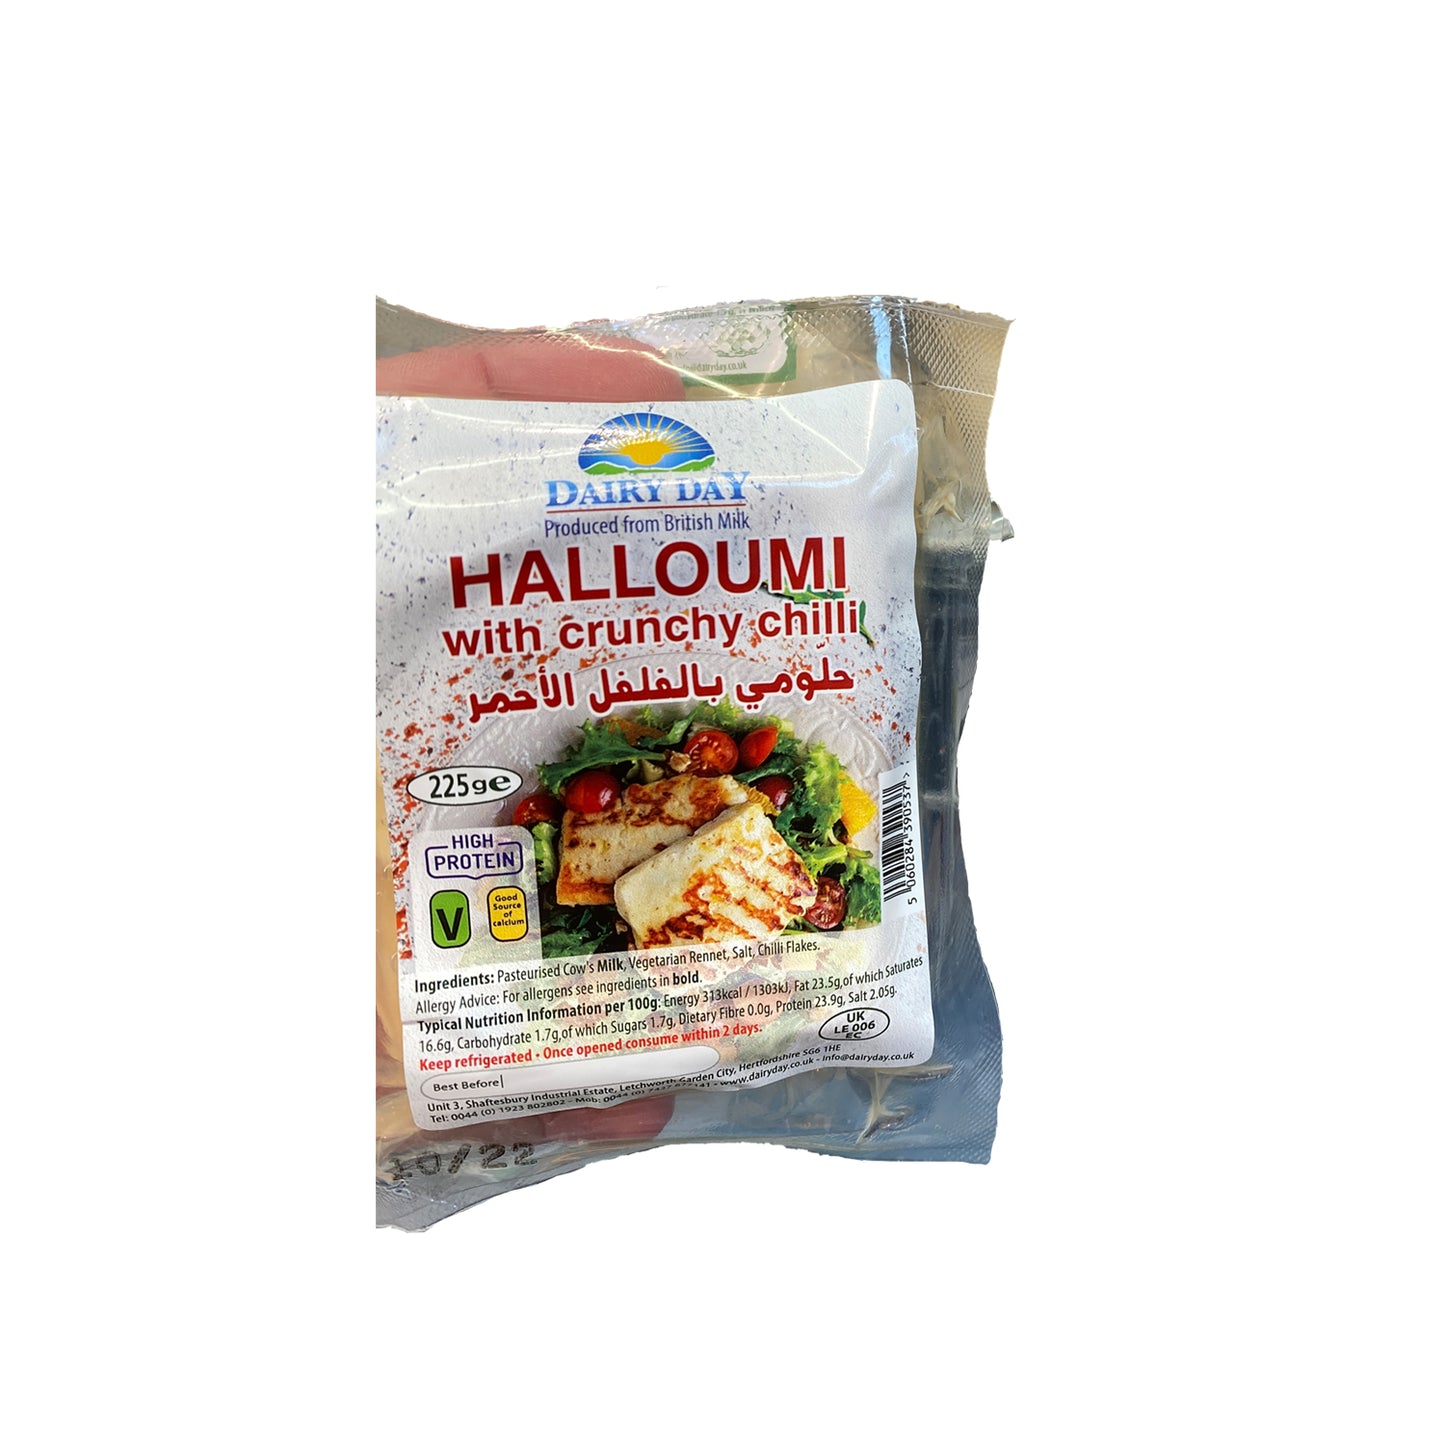 Dairy Day Halloumi With Crunchy Chilli Cheese 225g